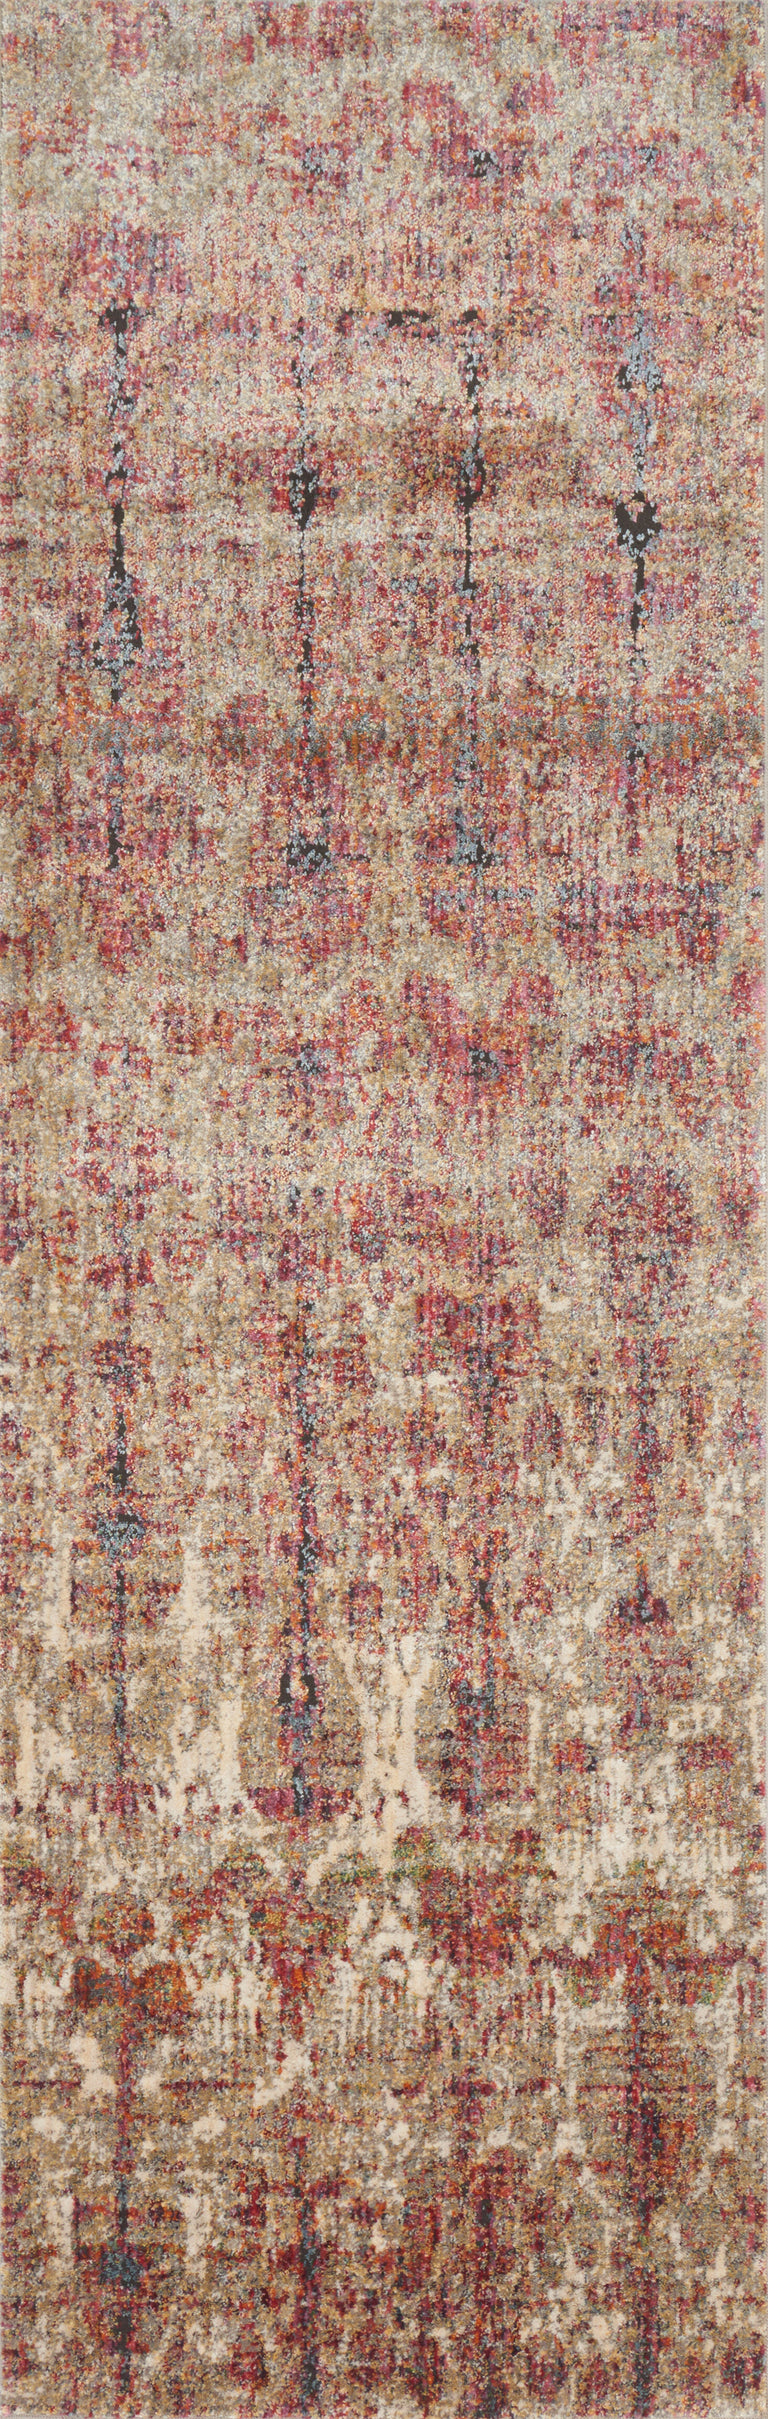 Loloi Rugs Javari Collection Rug in Drizzle, Berry - 7'10" x 10'